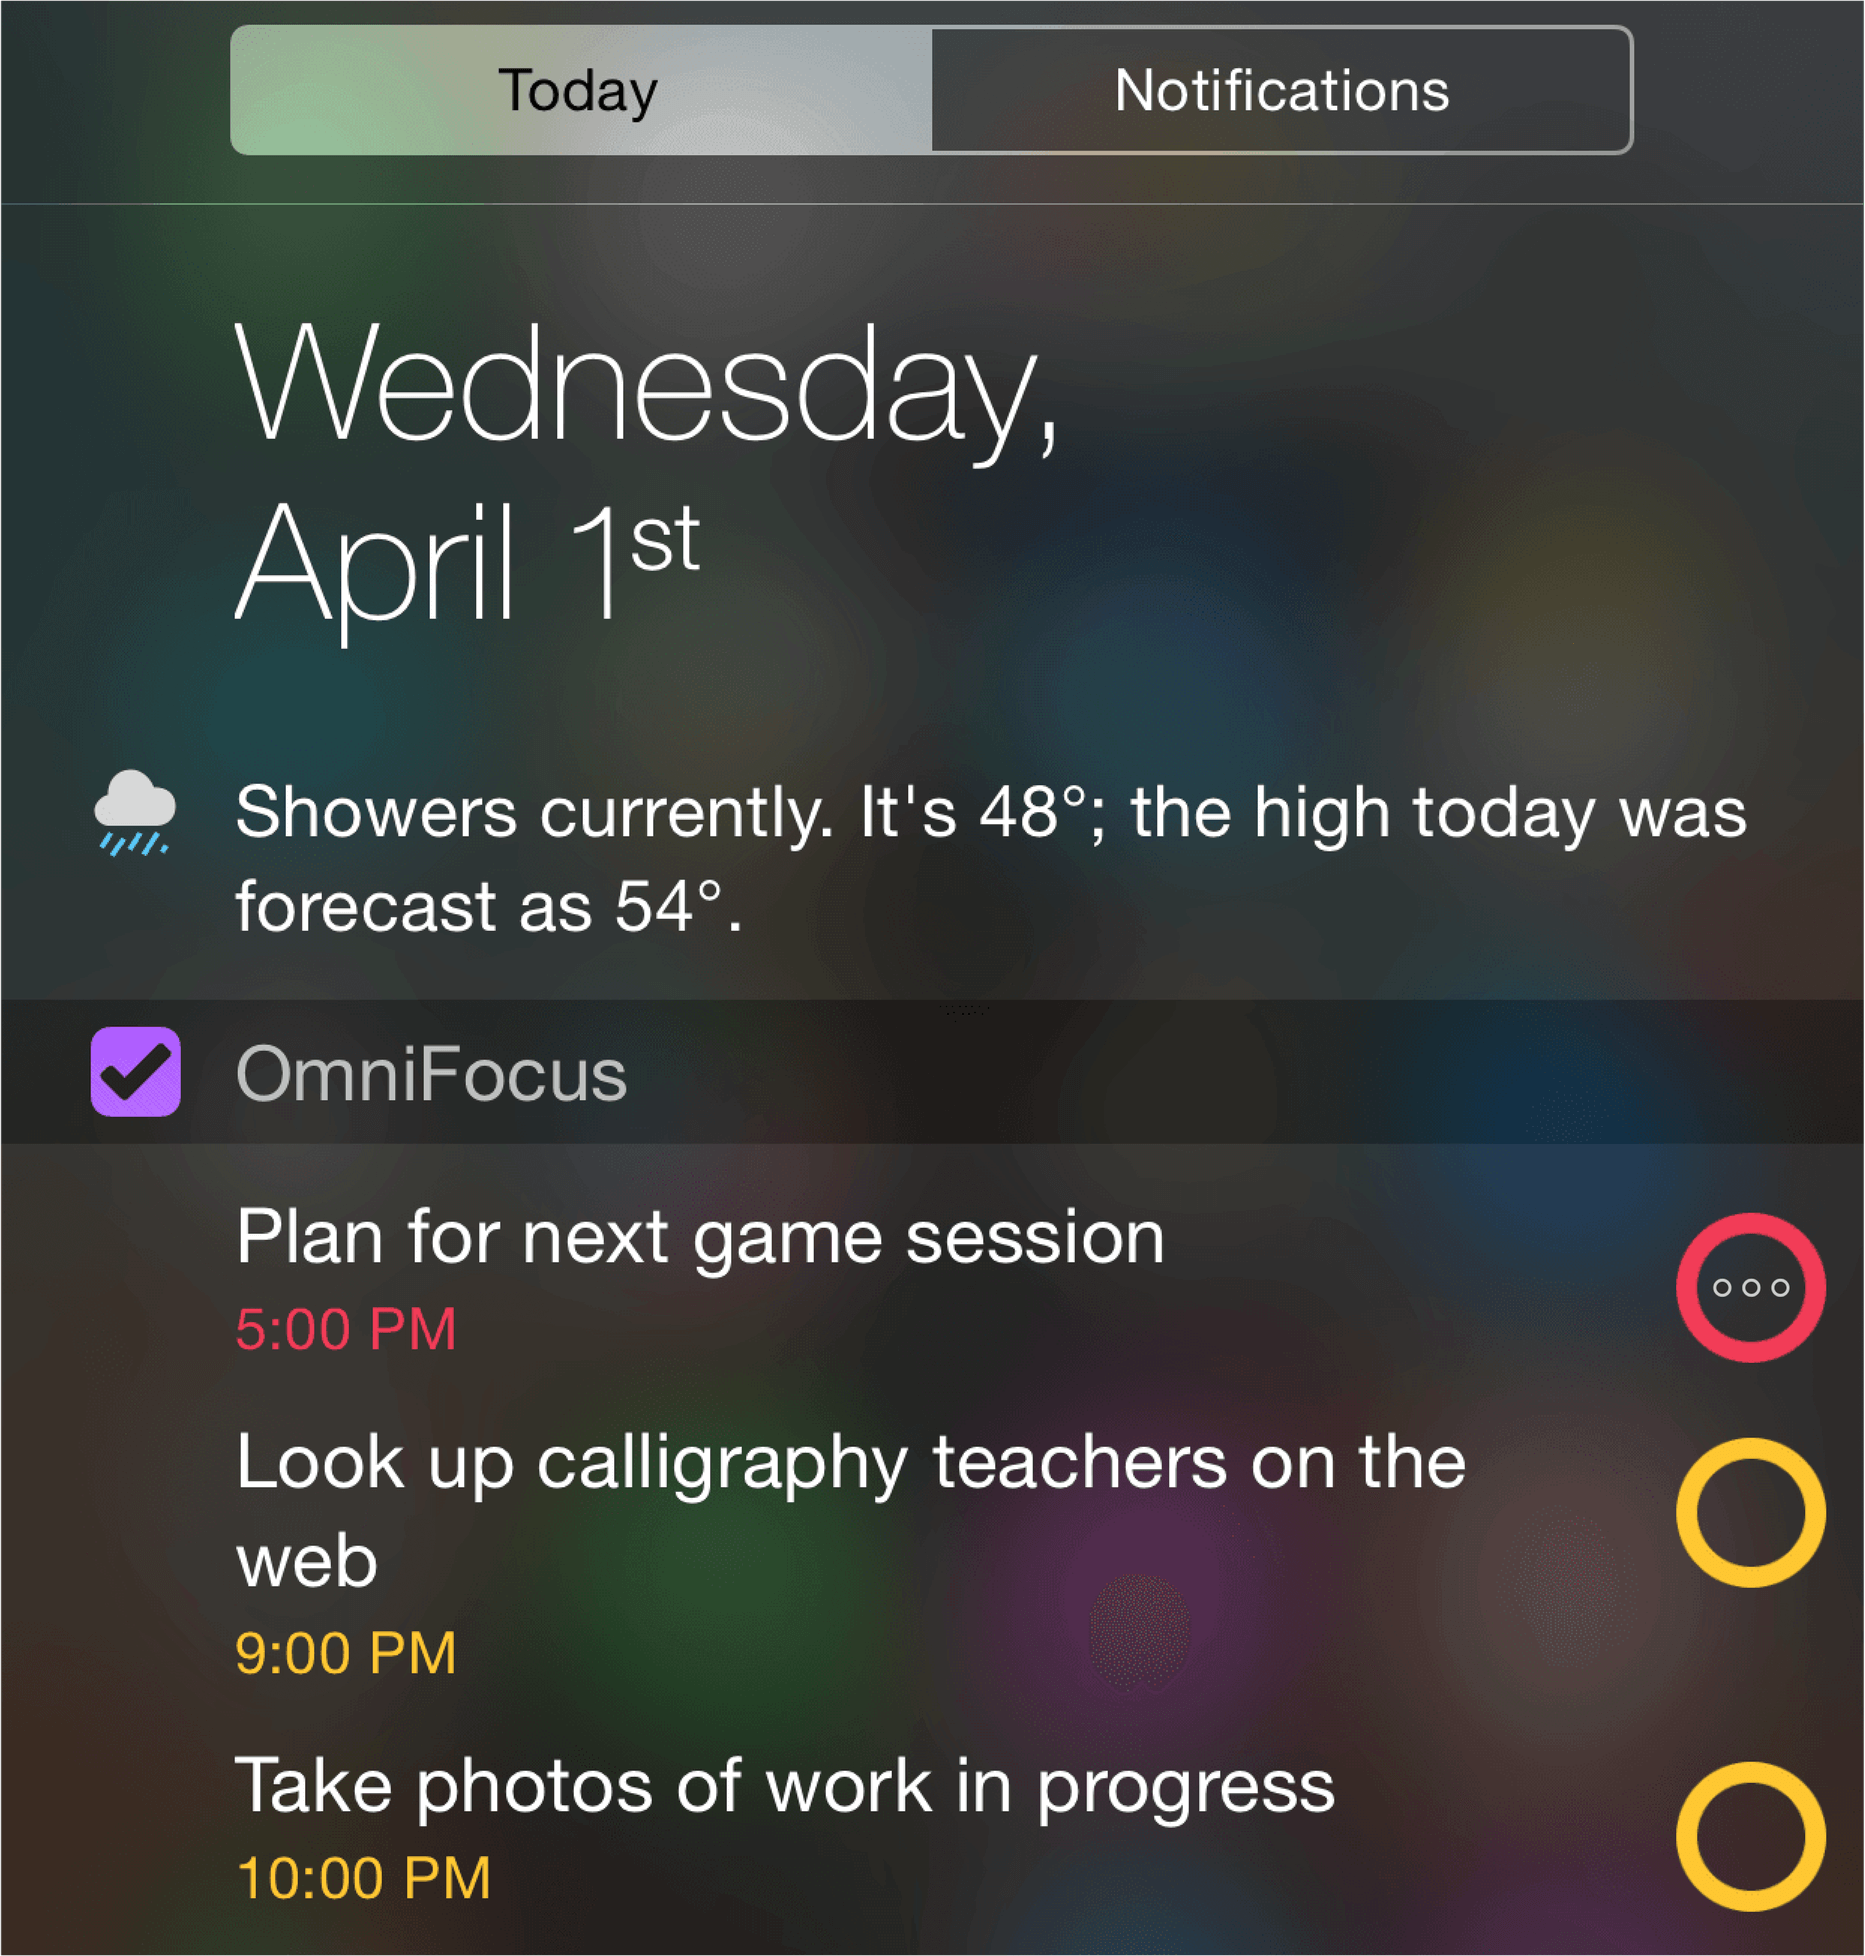 The Today extension with currently due OmniFocus actions visible.